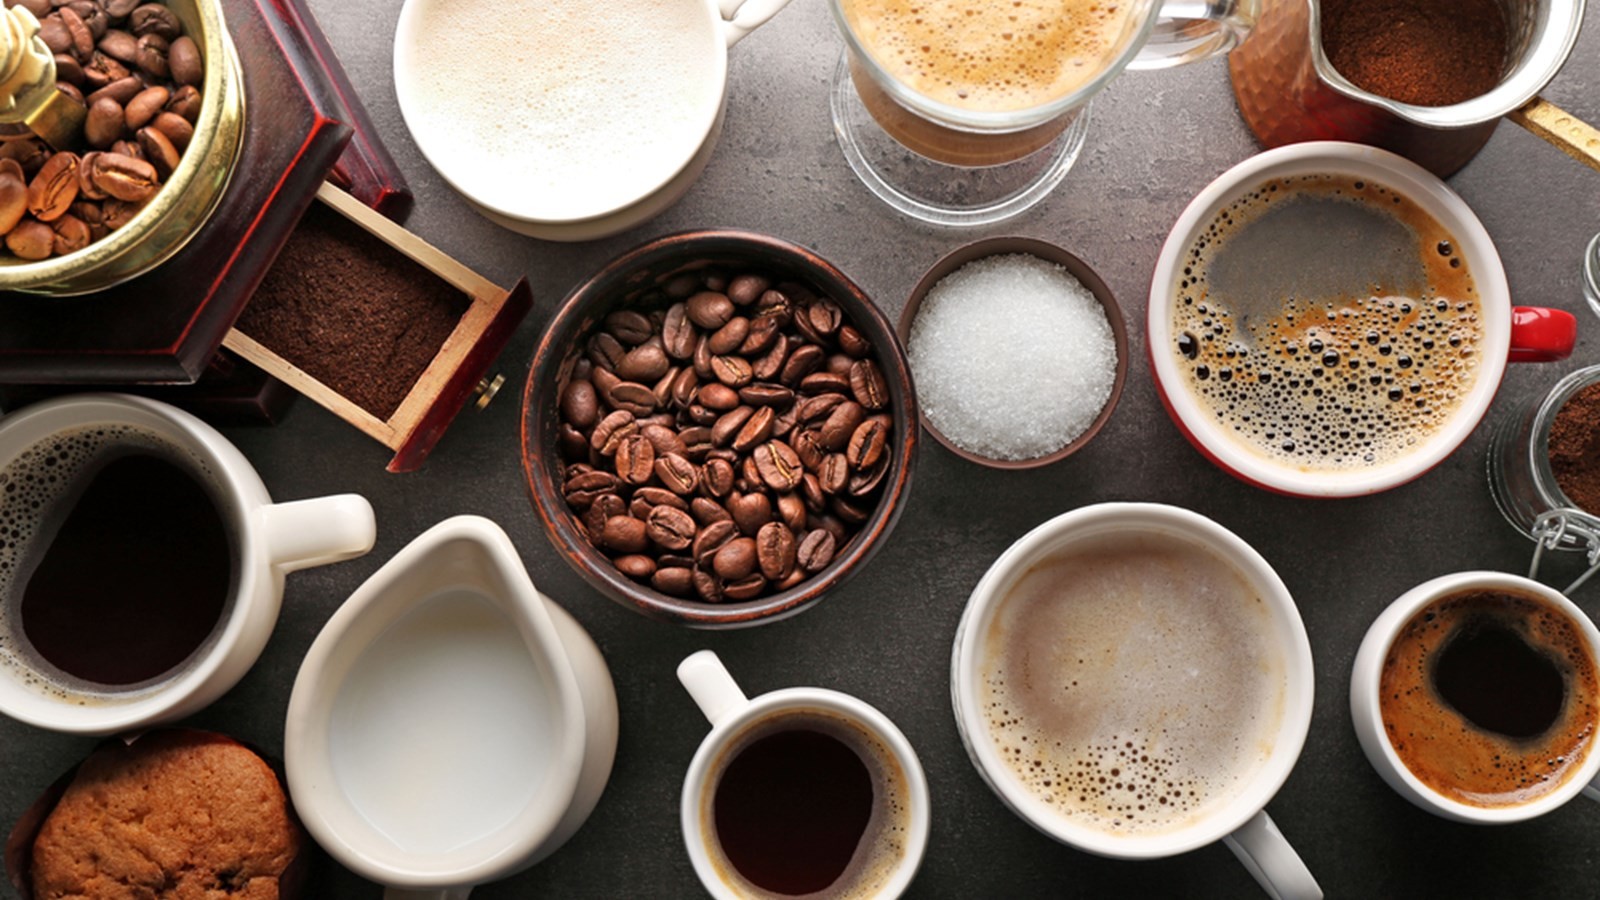 9 INTERESTING FACTS ABOUT COFFEE YOU DIDN'T KNOW